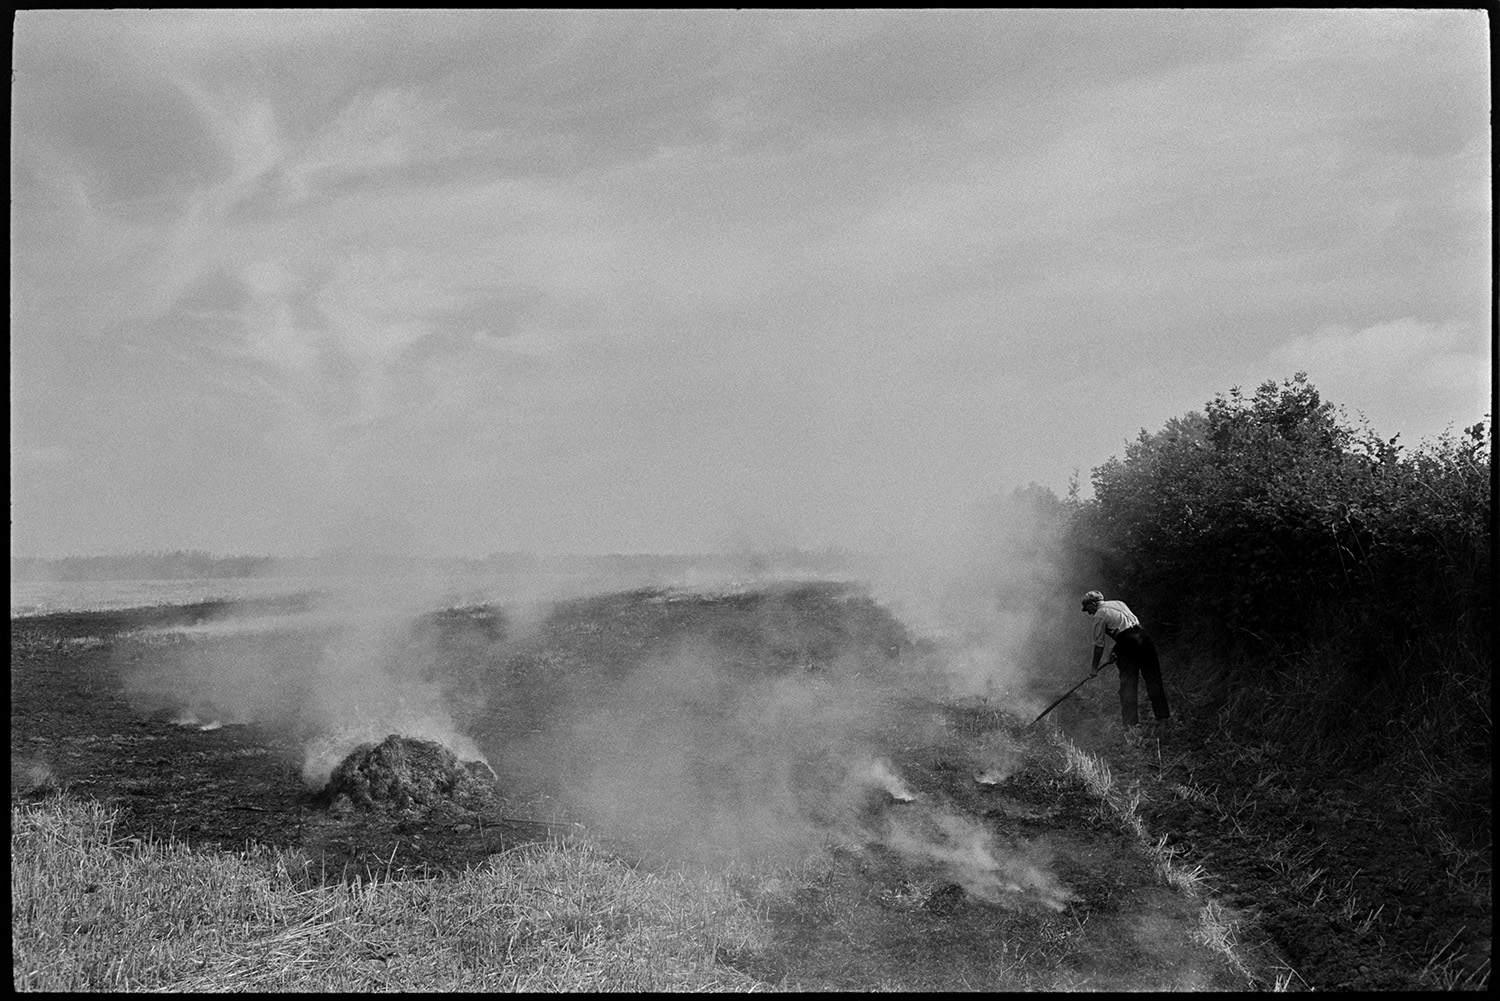 Farmer burning stubble. 
[Alf Pugsley burning crop stubble in a field at Lower Langham, Dolton. Smoke is rising from the burnt areas.]